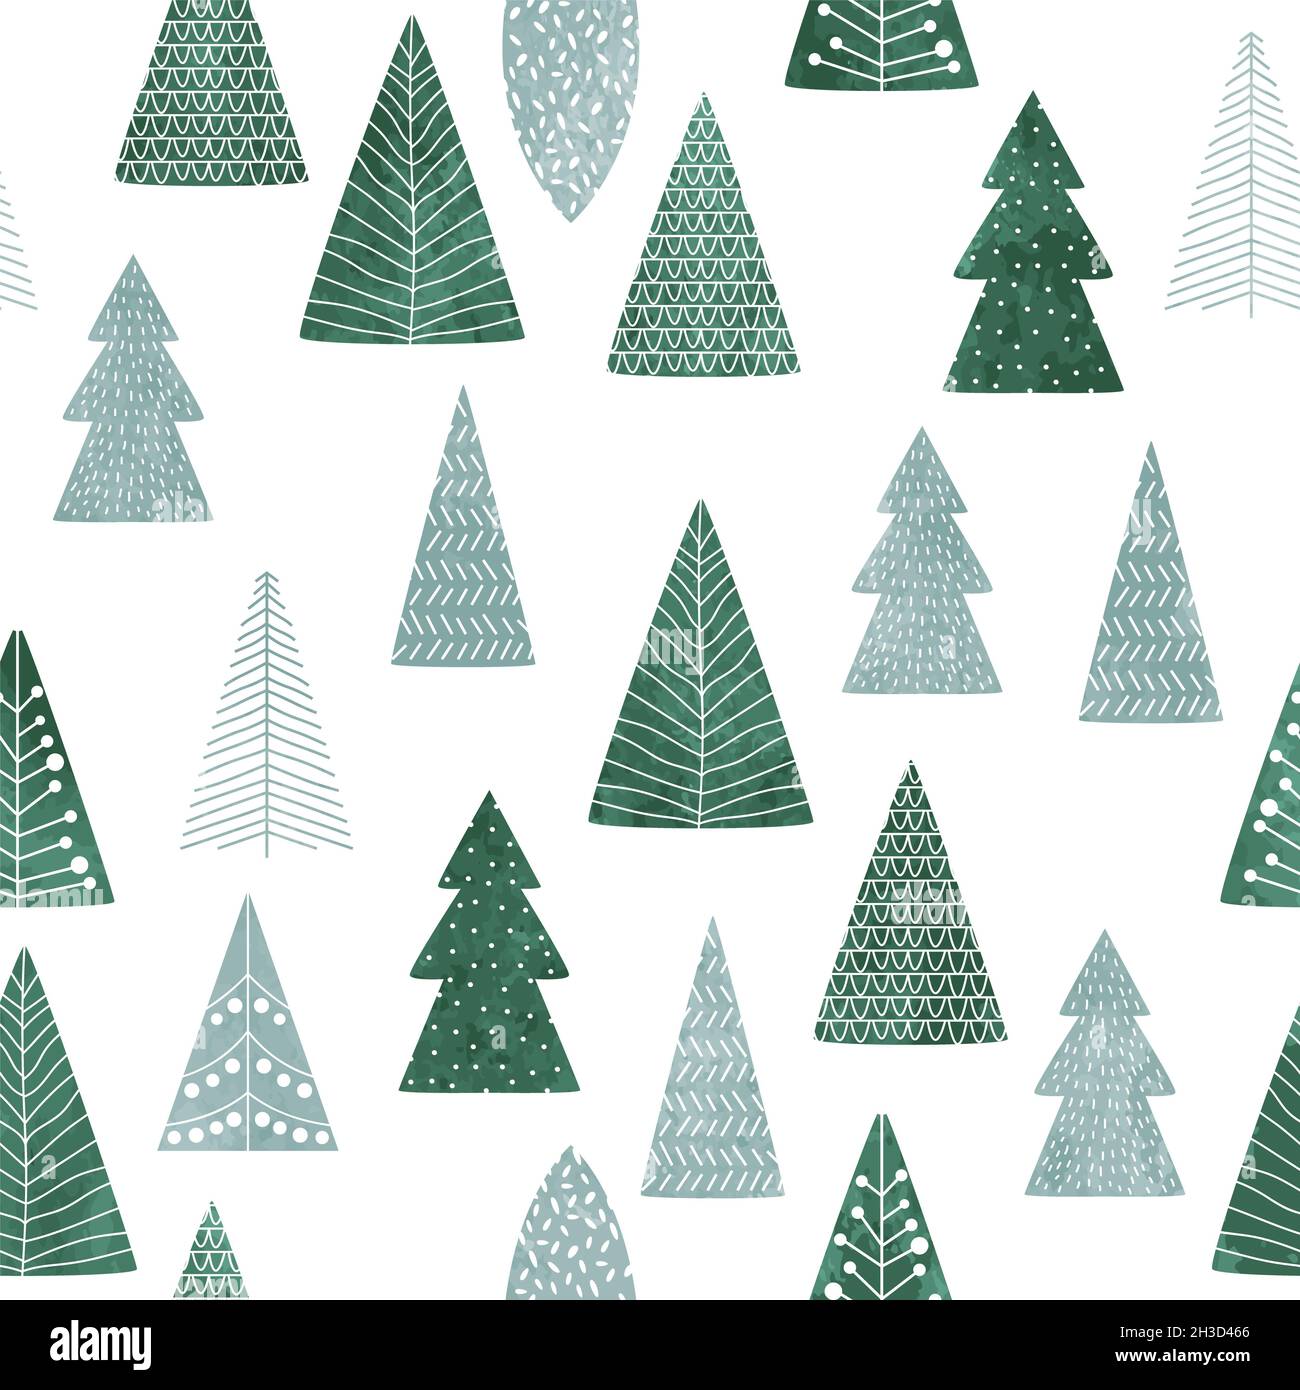 Merry Christmas hand drawn pine tree seamless pattern with watercolor nordic art decoration. Scandinavian style forest doodle cartoon background. Stock Photo